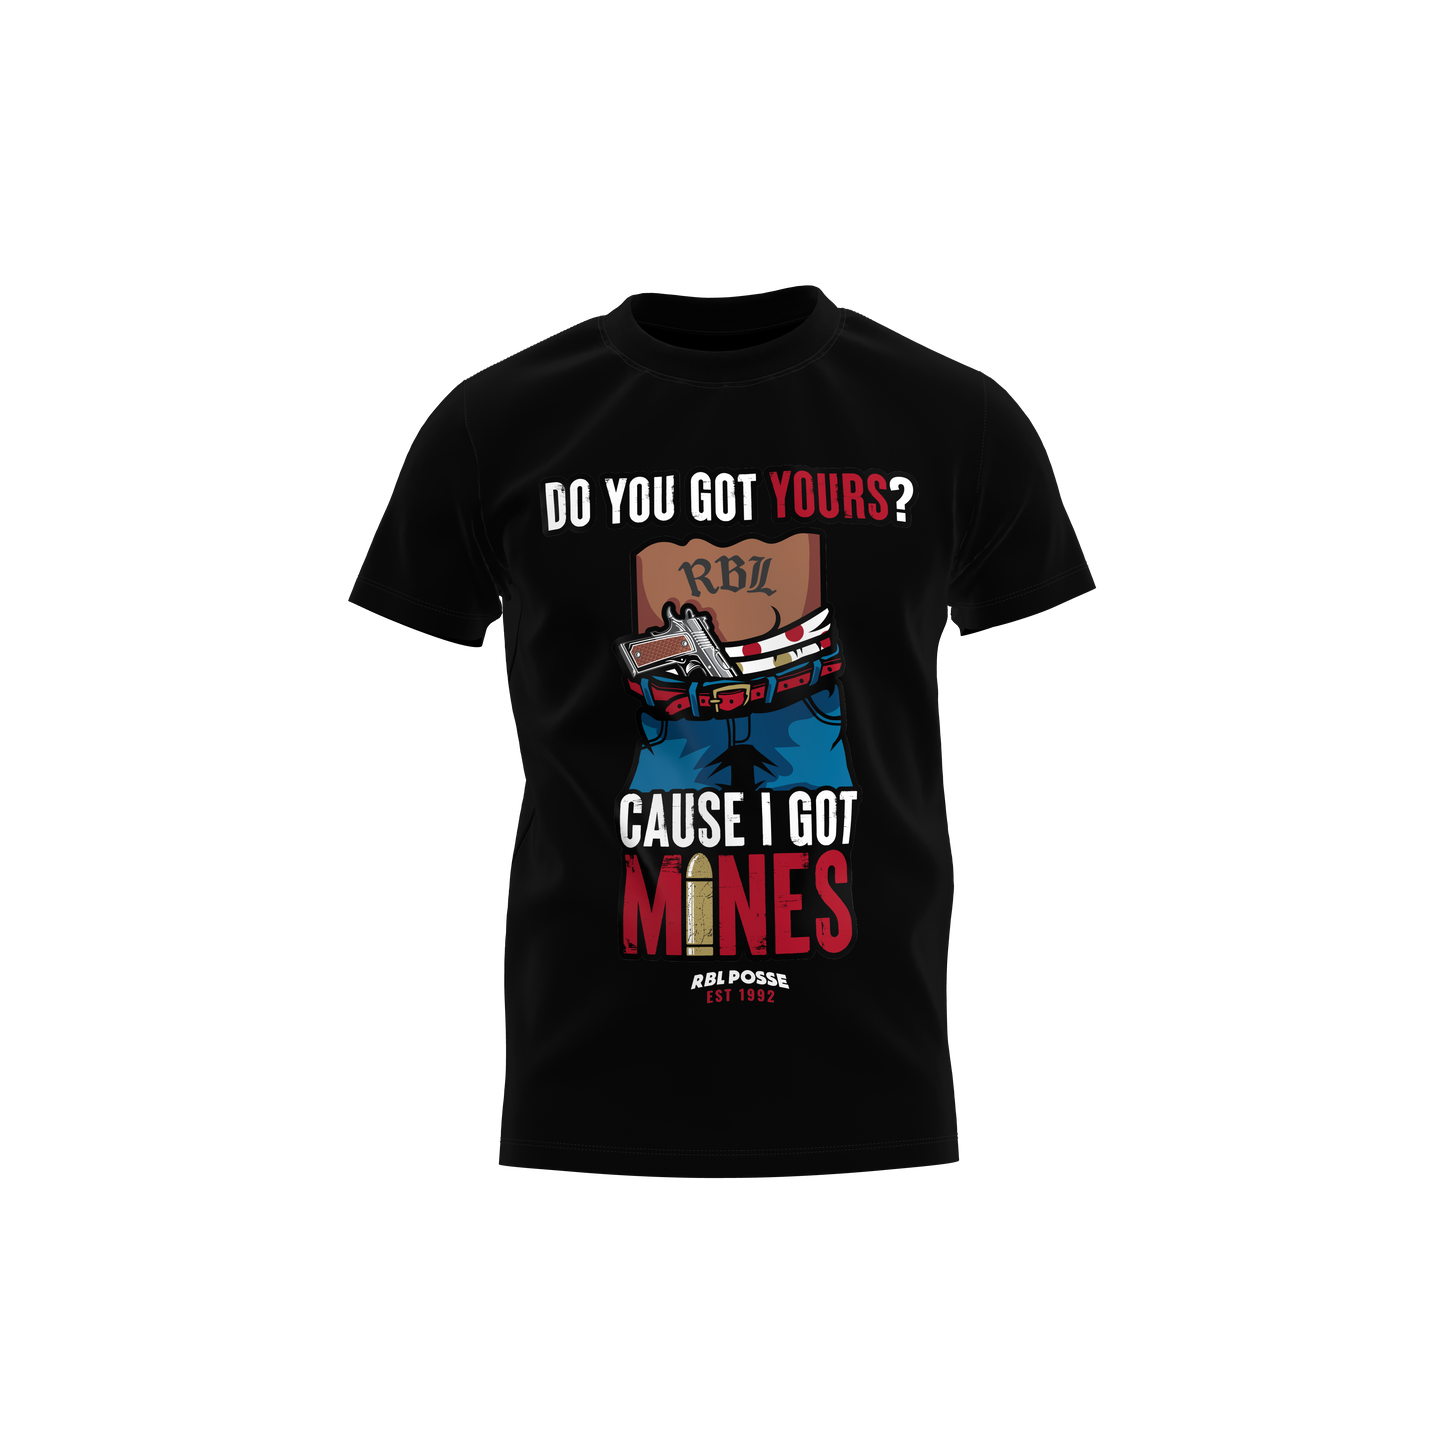 "DO YOU GOT YOURS ?" TEE